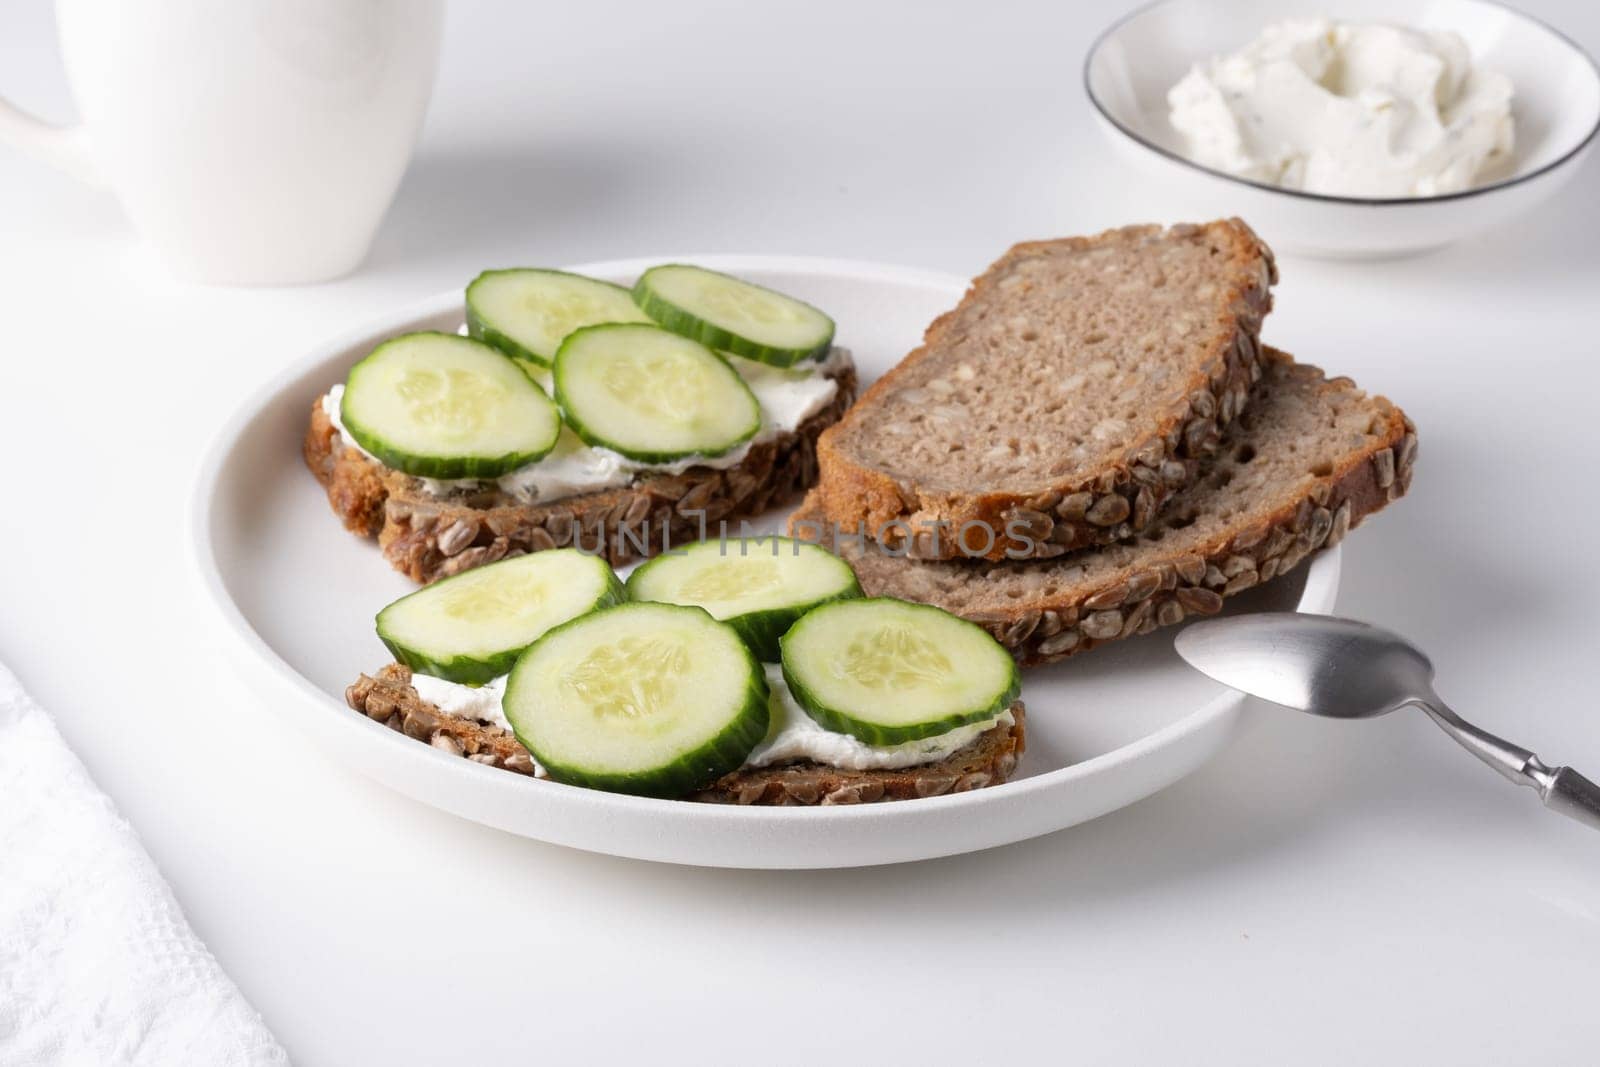 Rye bread with cream cheese and cucumbers on a white table. Whole grain rye bread with seeds.